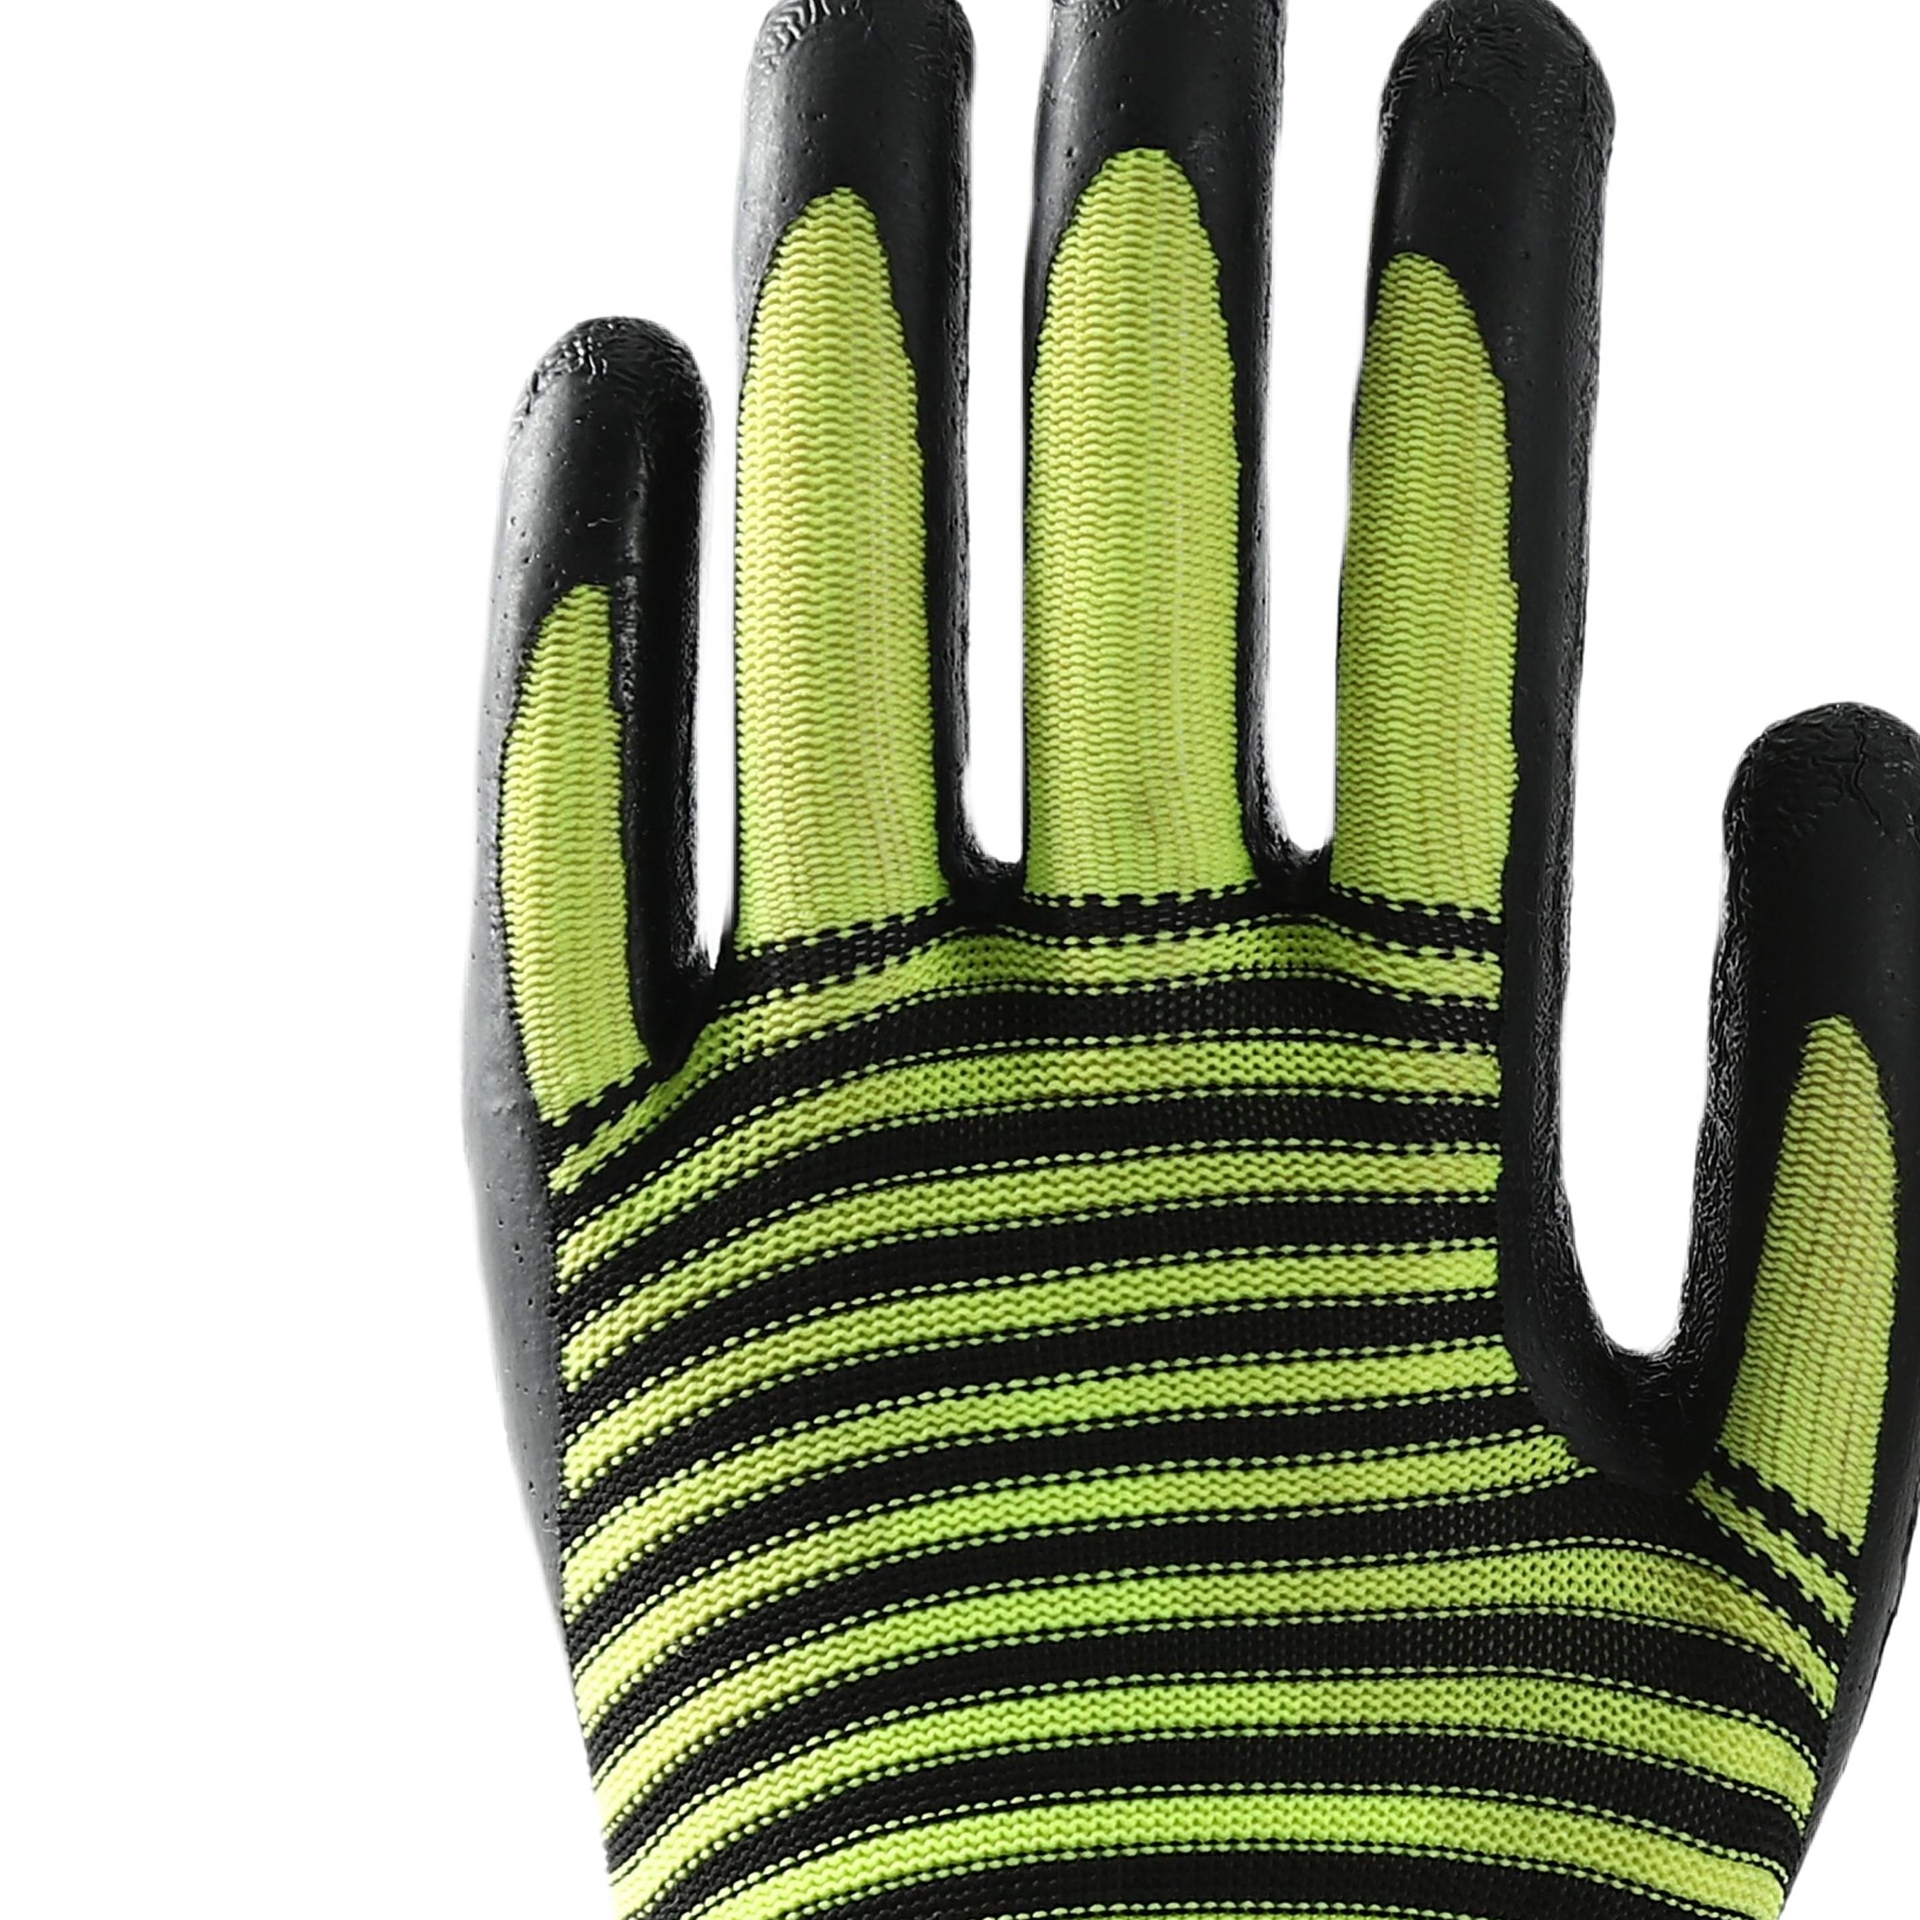                 Pattern polyester with gray crinkle latex coated gloves            